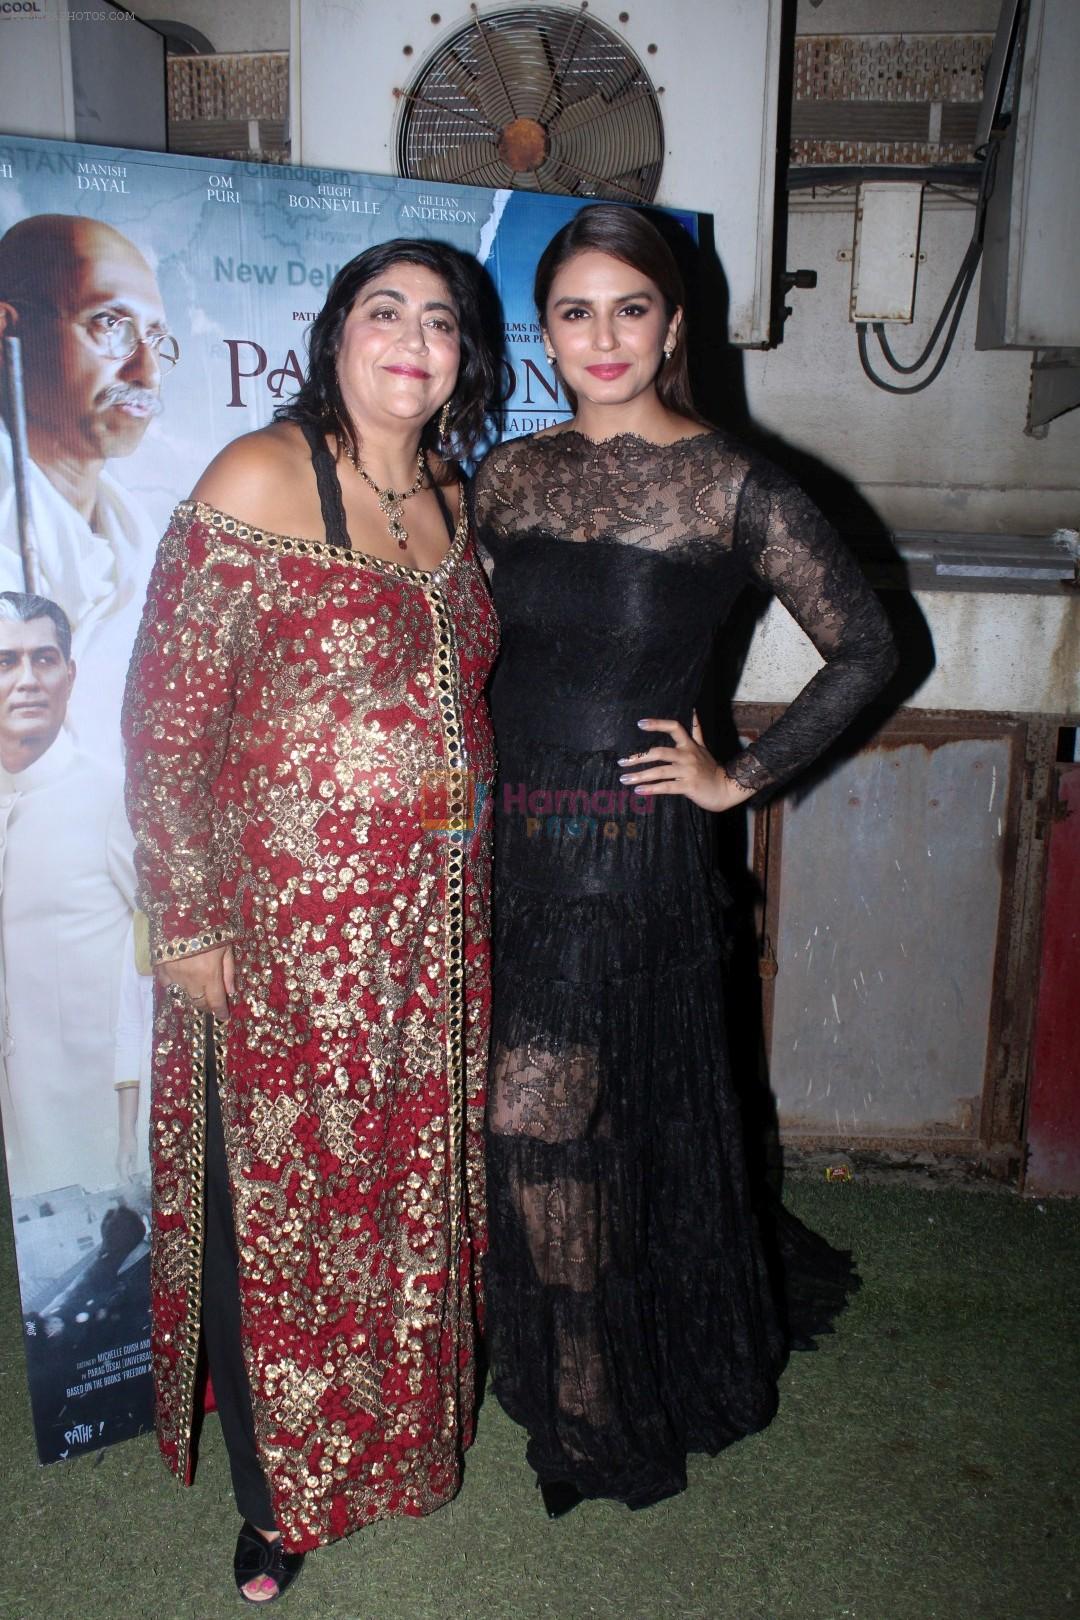 Huma Qureshi, Gurinder Chadha at the Special Screening Of Film Partition 1947 on 17th Aug 2017